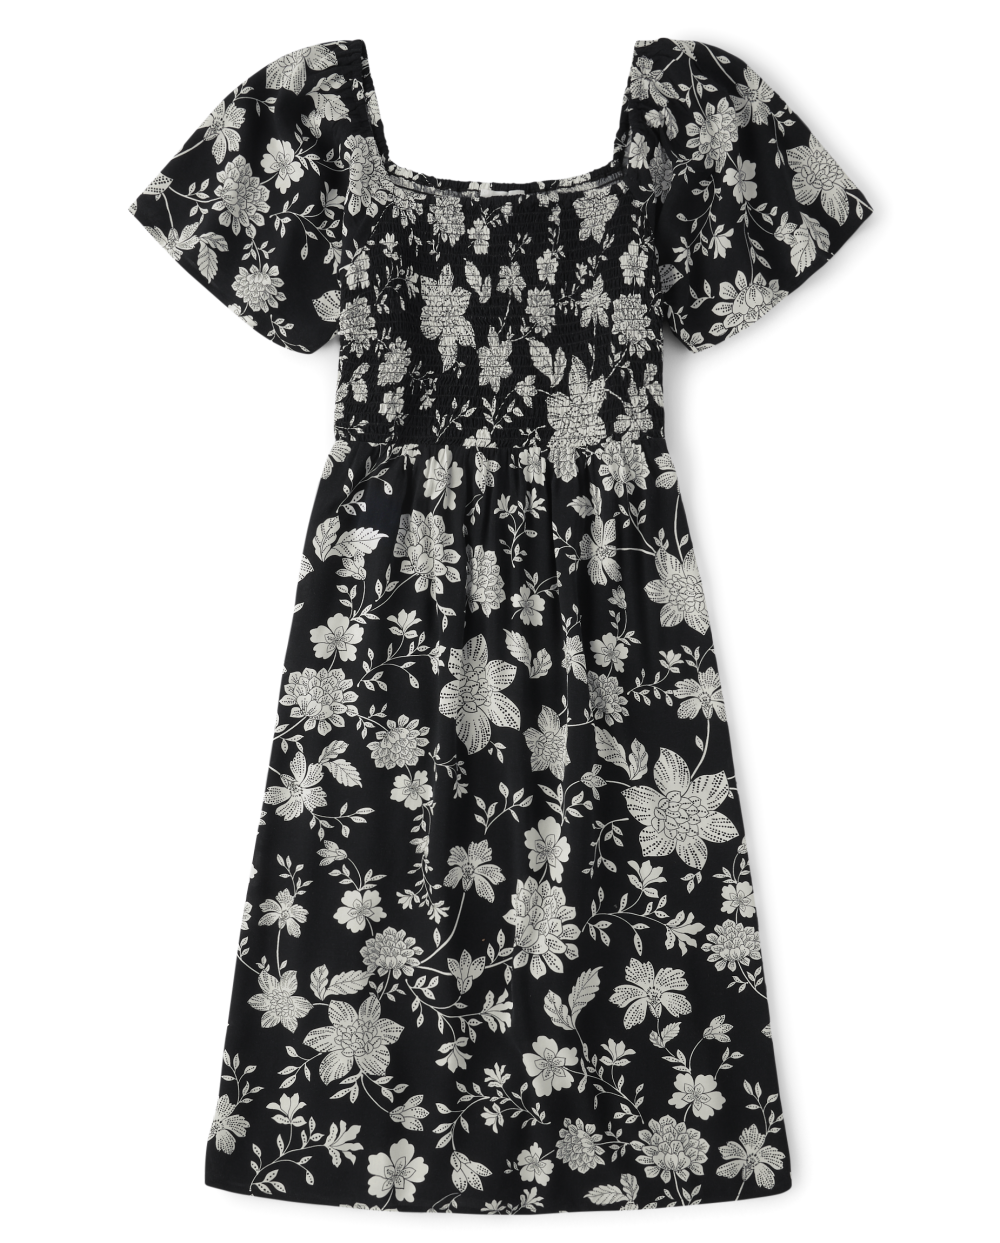 Floral Print Smocked Square Neck Flutter Short Sleeves Sleeves Above the Knee Rayon Dress